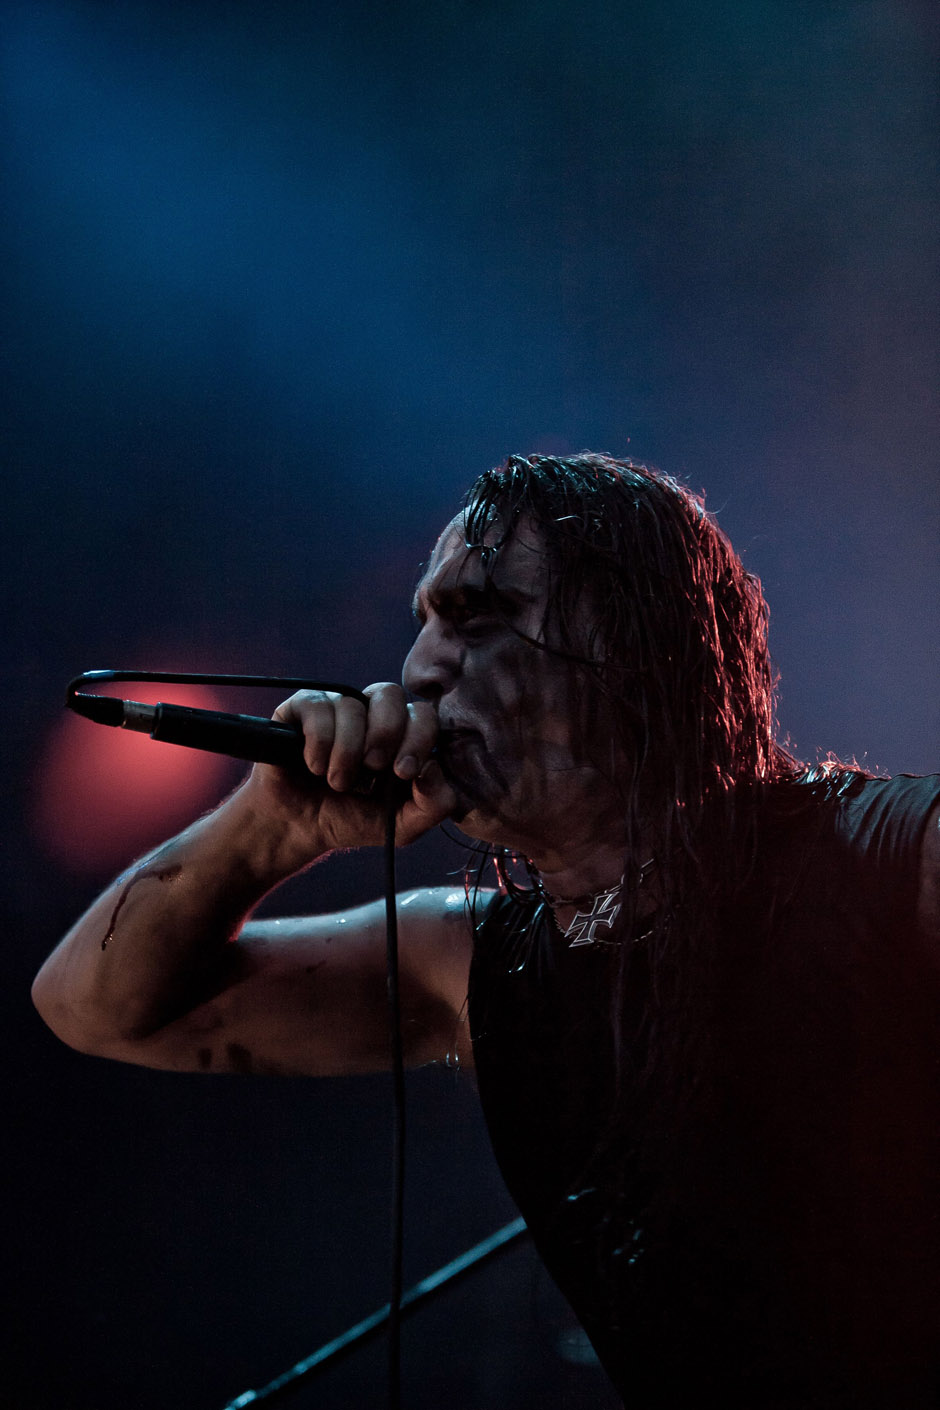 Marduk live, Extremefest 2012 in Hünxe